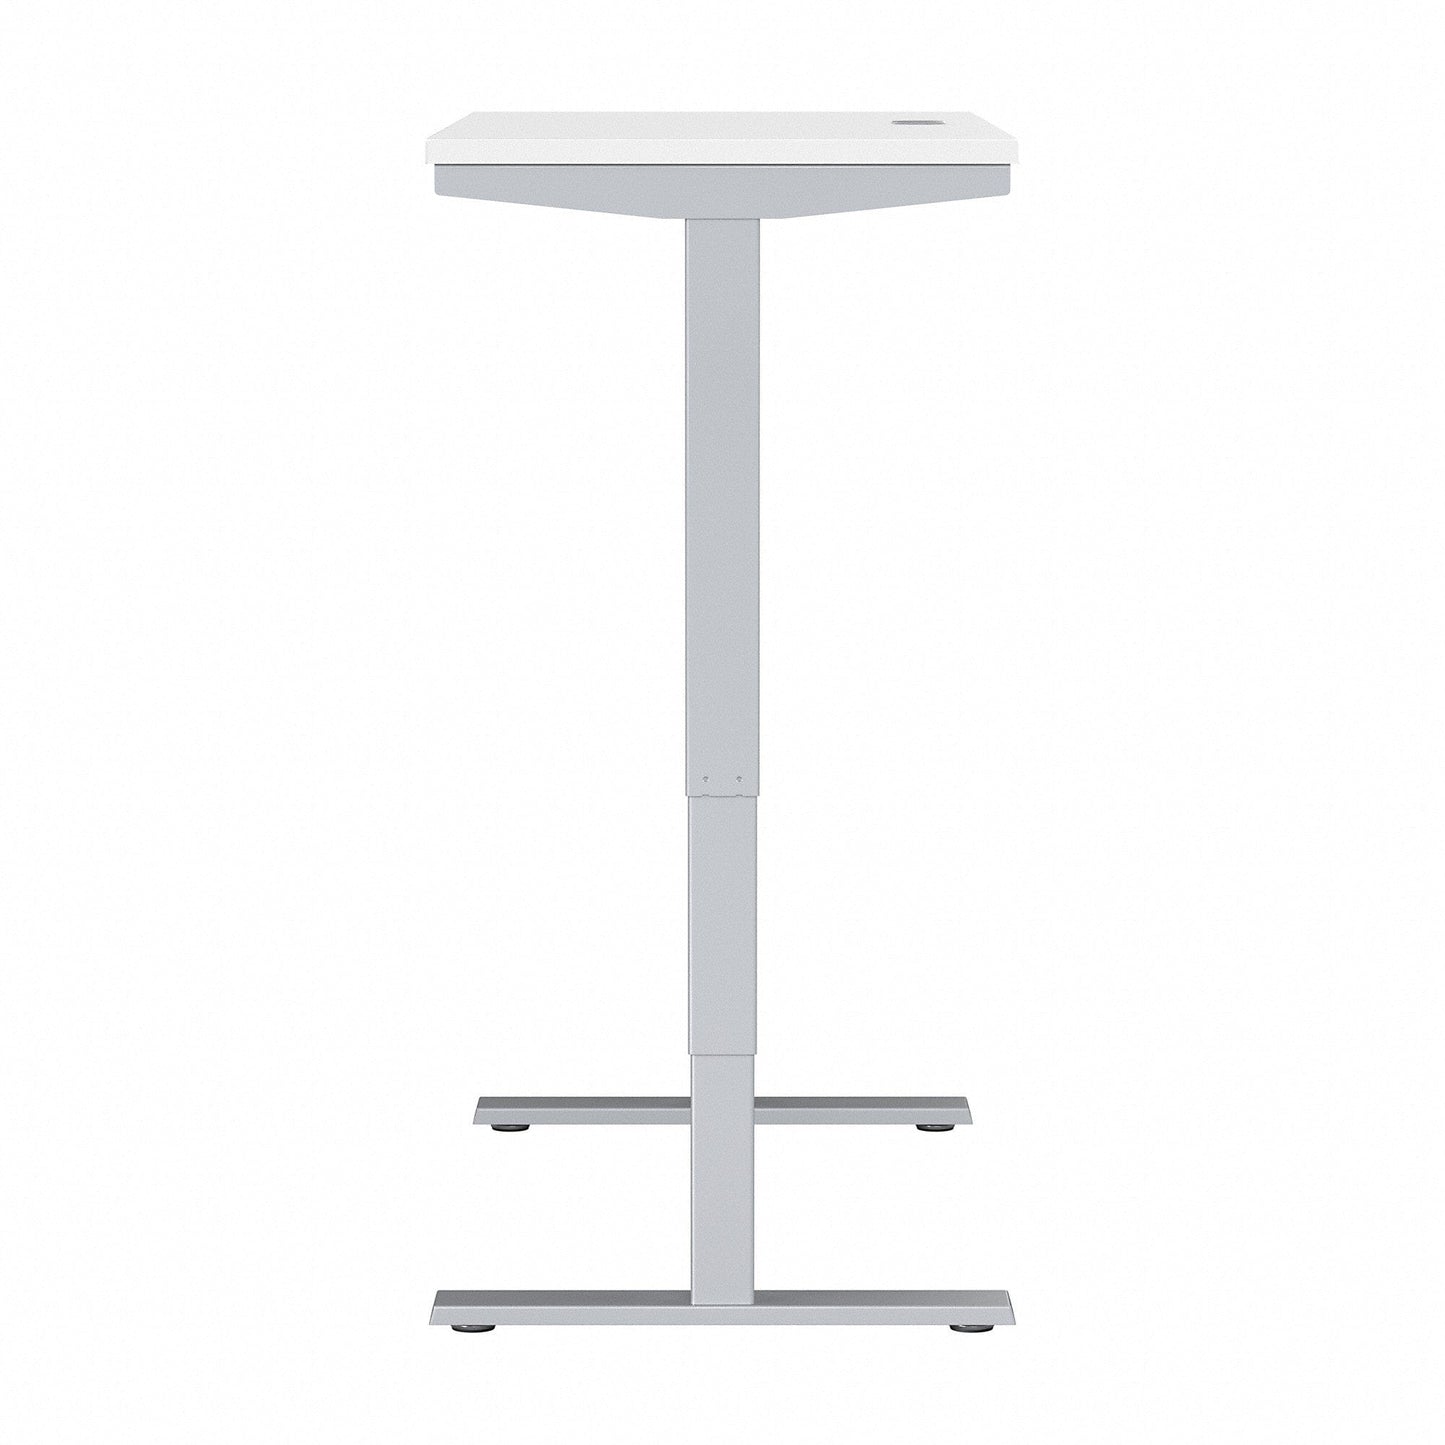 BFF Series C M4S6030WHSK BFF Series 60W x 30D Height Adjustable Standing Desk Move 40 Series: White